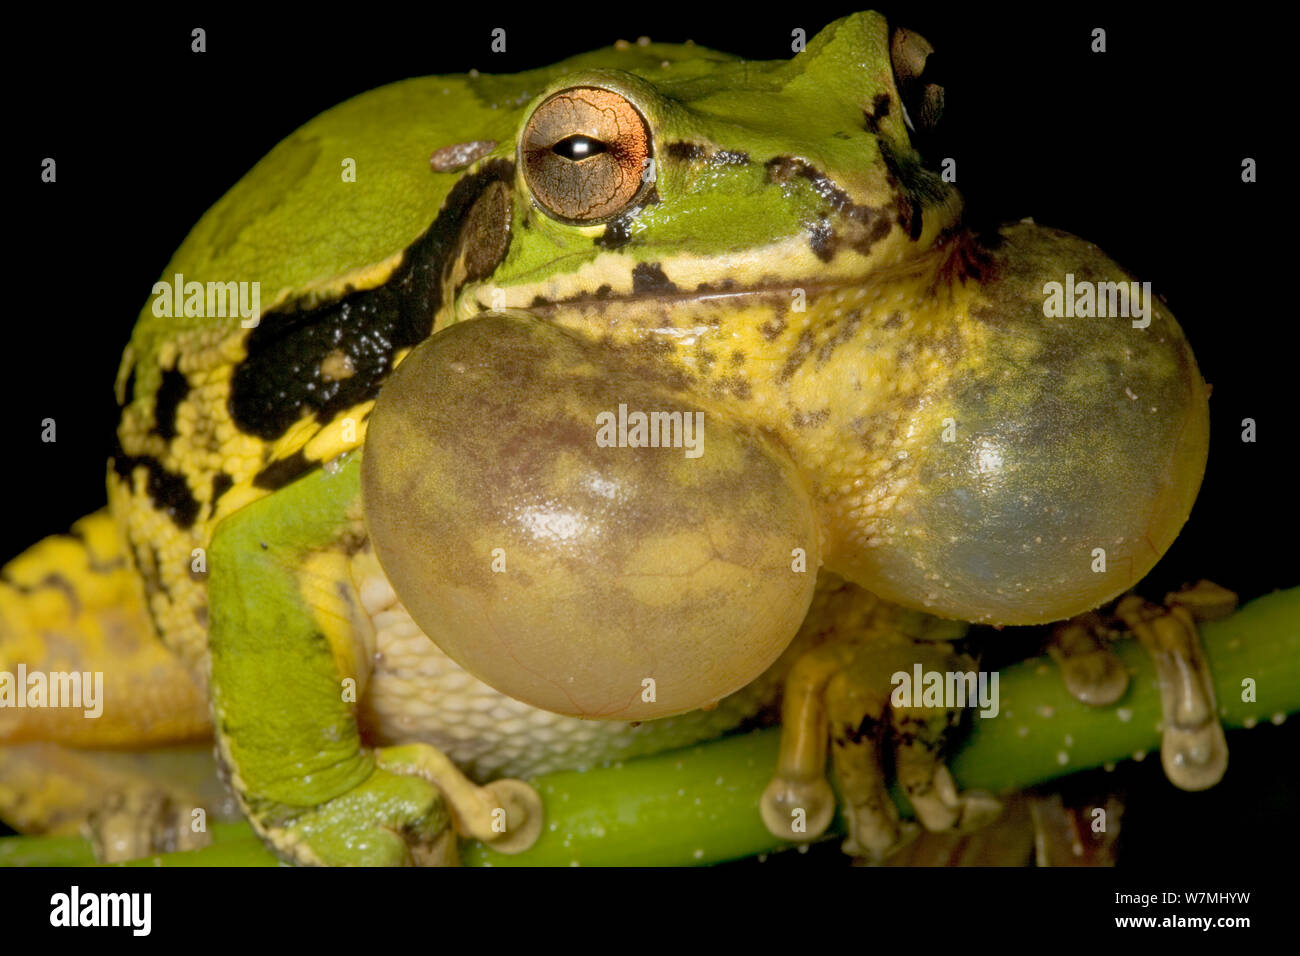 Common Mexican Treefrog (Smilisca baudinii) calling with inflated throat sacs. Maria Madre Island, Islas Marias Biosphere Reserve, Sea of Cortez (Gulf of California), Mexico, August. Stock Photo